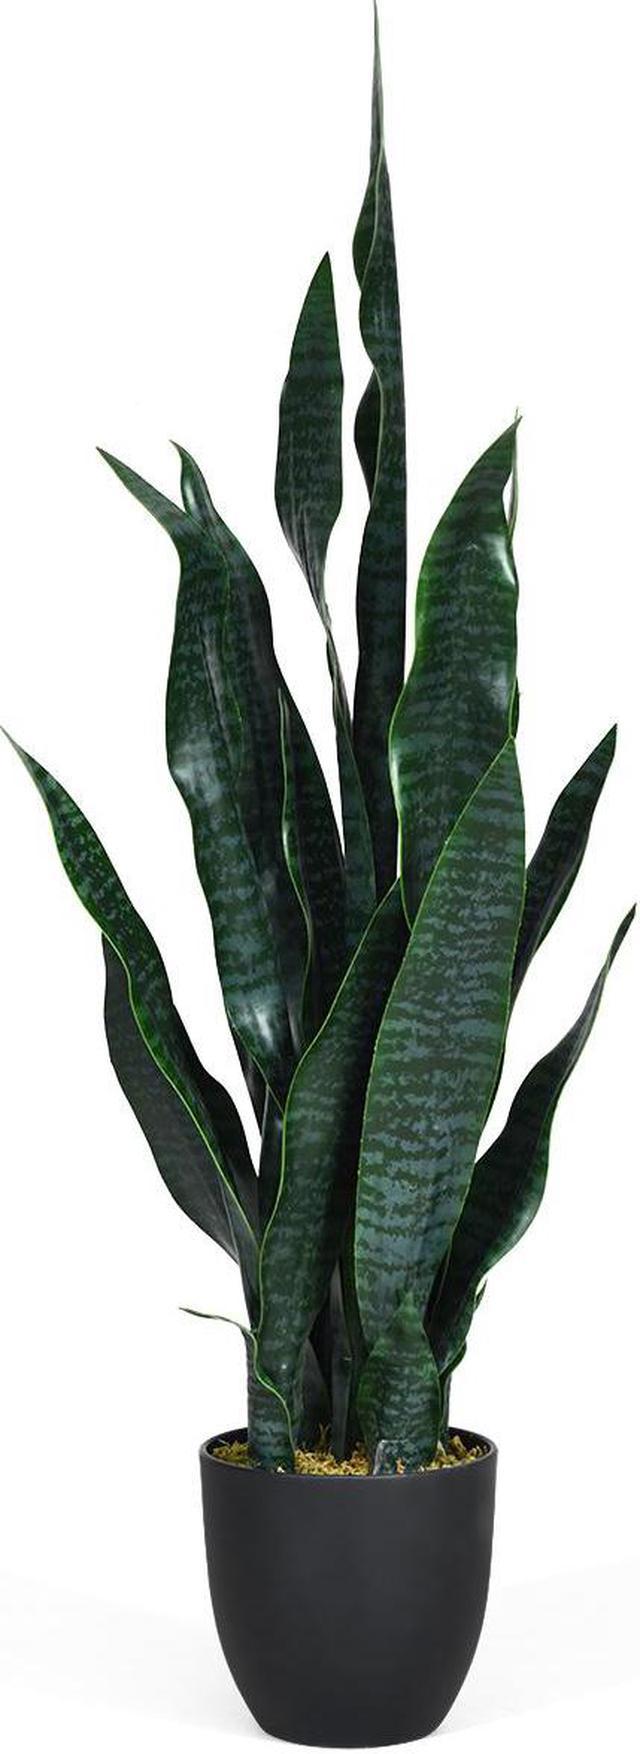 35.5 Indoor-Outdoor Artificial Fake Snake Plant